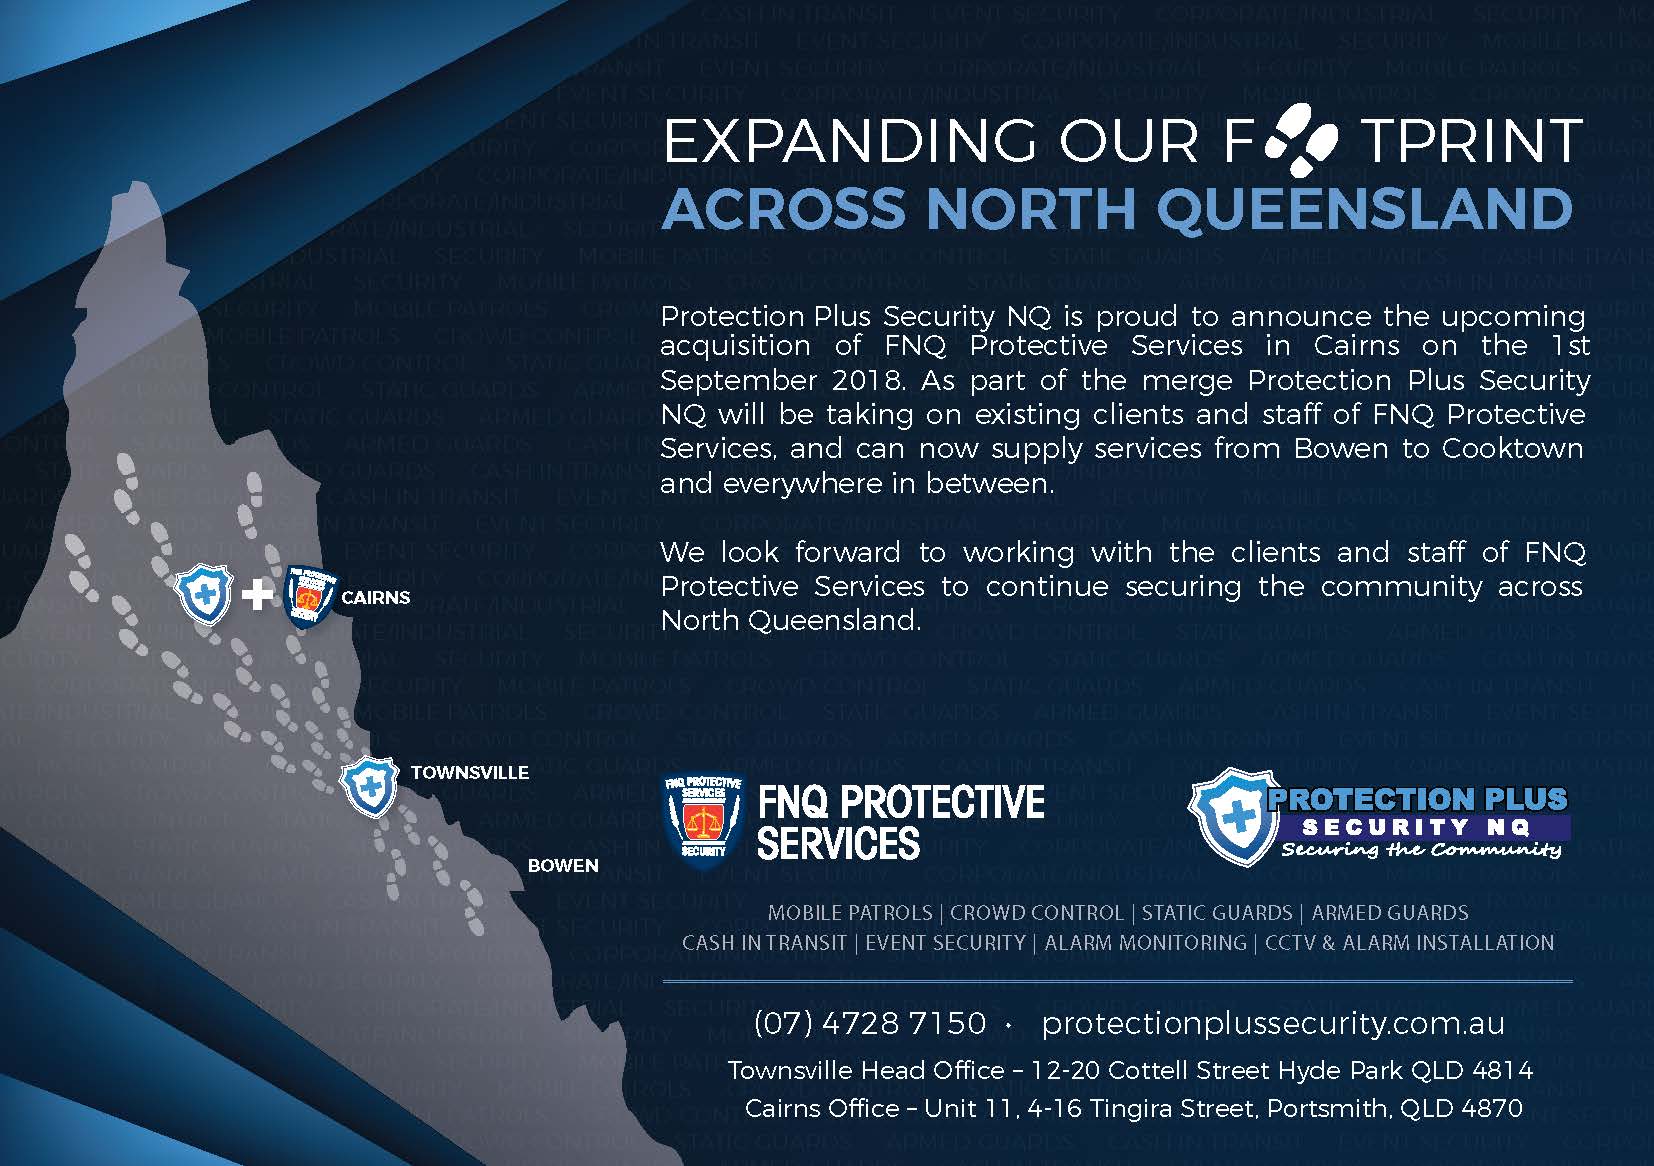 You are currently viewing Armed Security Officers, Security Officers, Mobile Patrol Officers & Event Security – Cairns Region